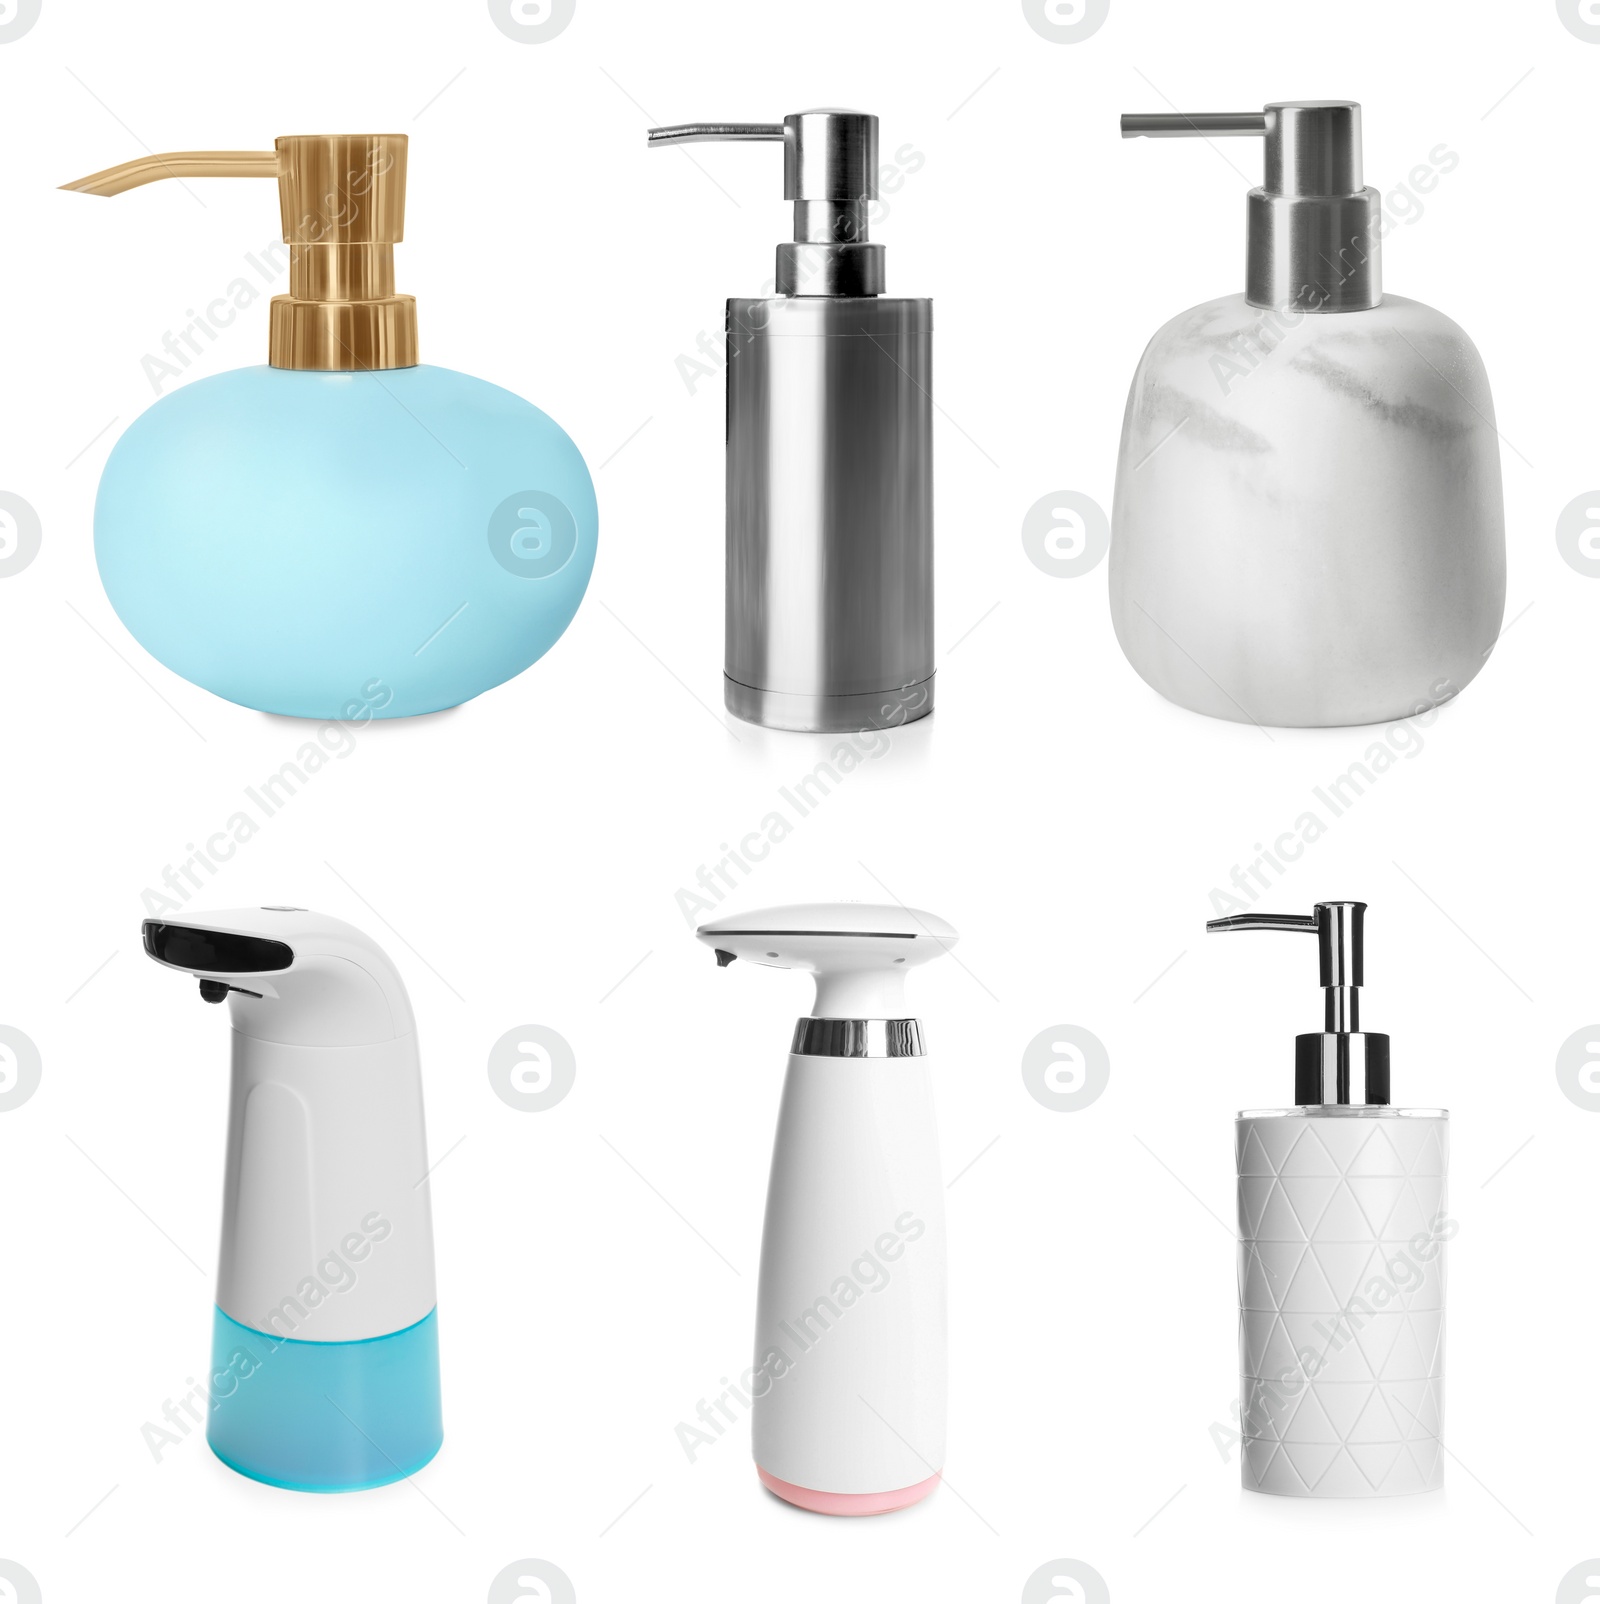 Image of Set of different soap dispensers on white background